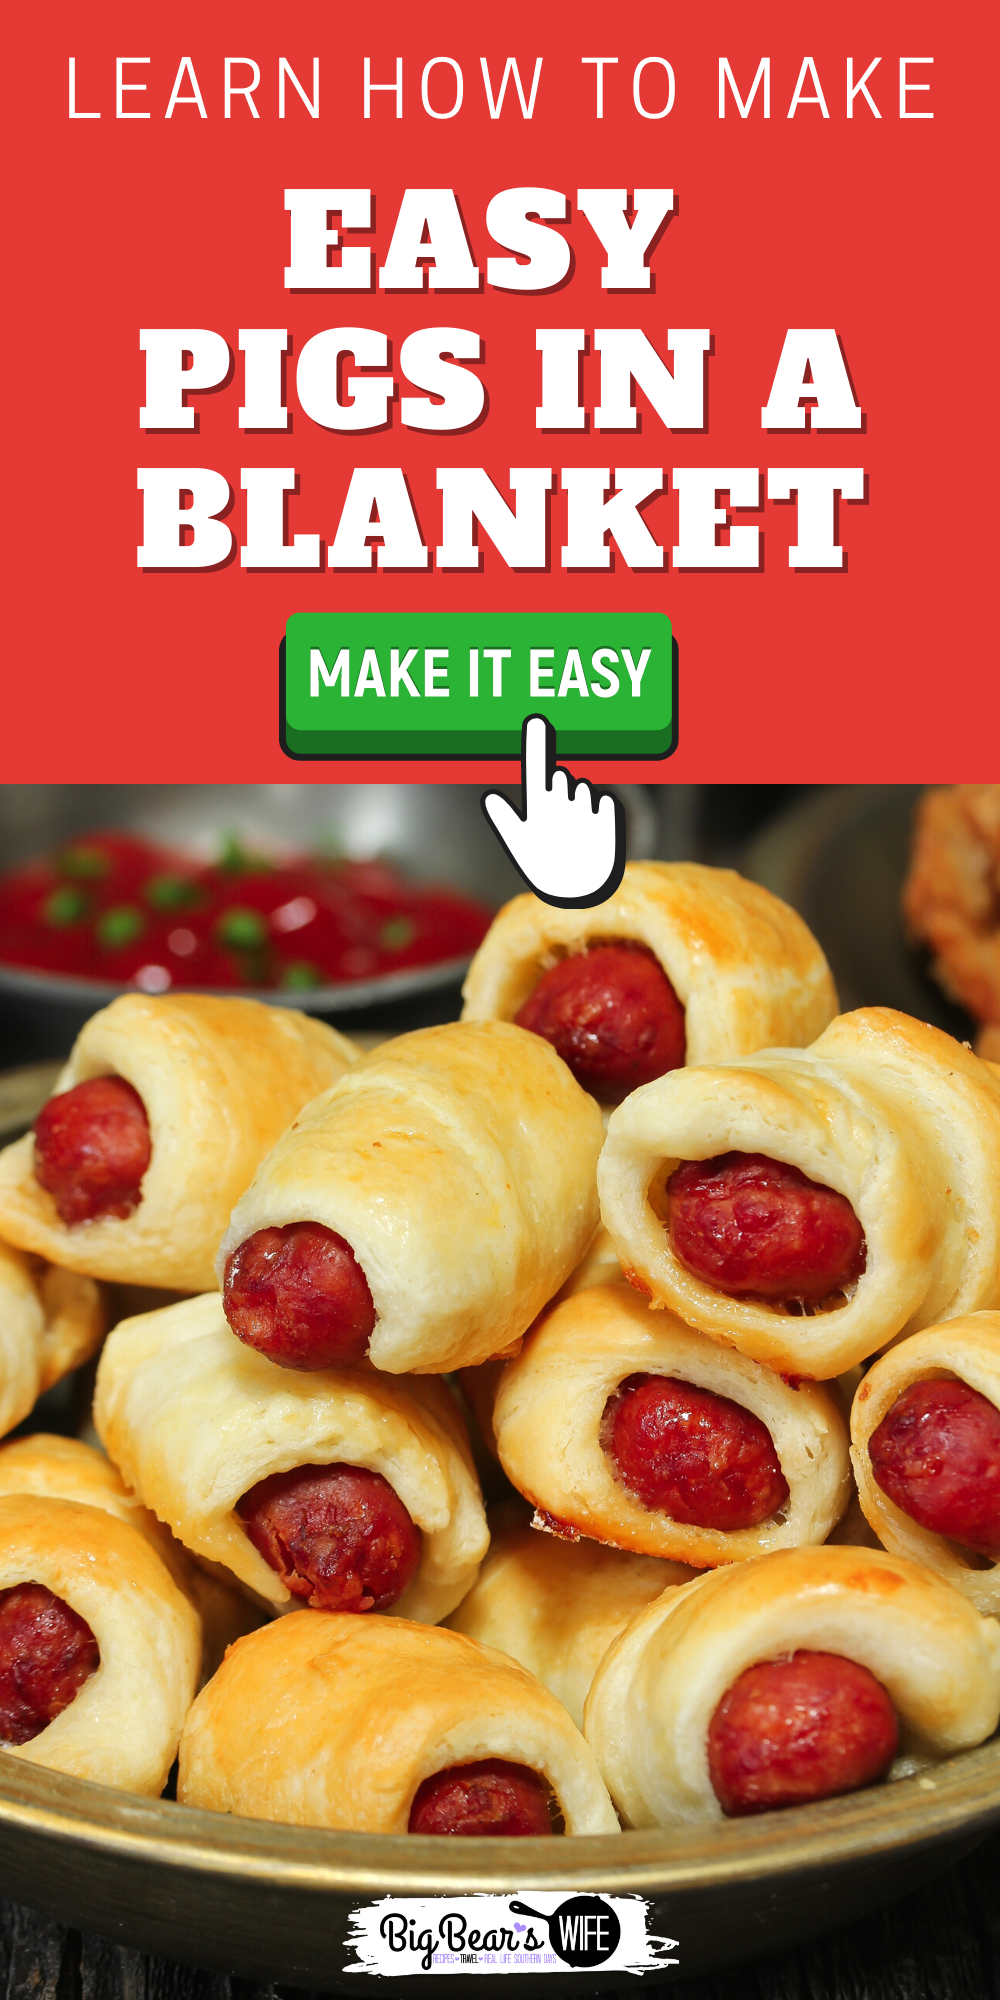 Pigs in a Blanket are super easy to make and every always loves them at cookouts and parties! Hot Dogs, Crescent Rolls and the Oven are all you need to make these classic finger food bites! via @bigbearswife